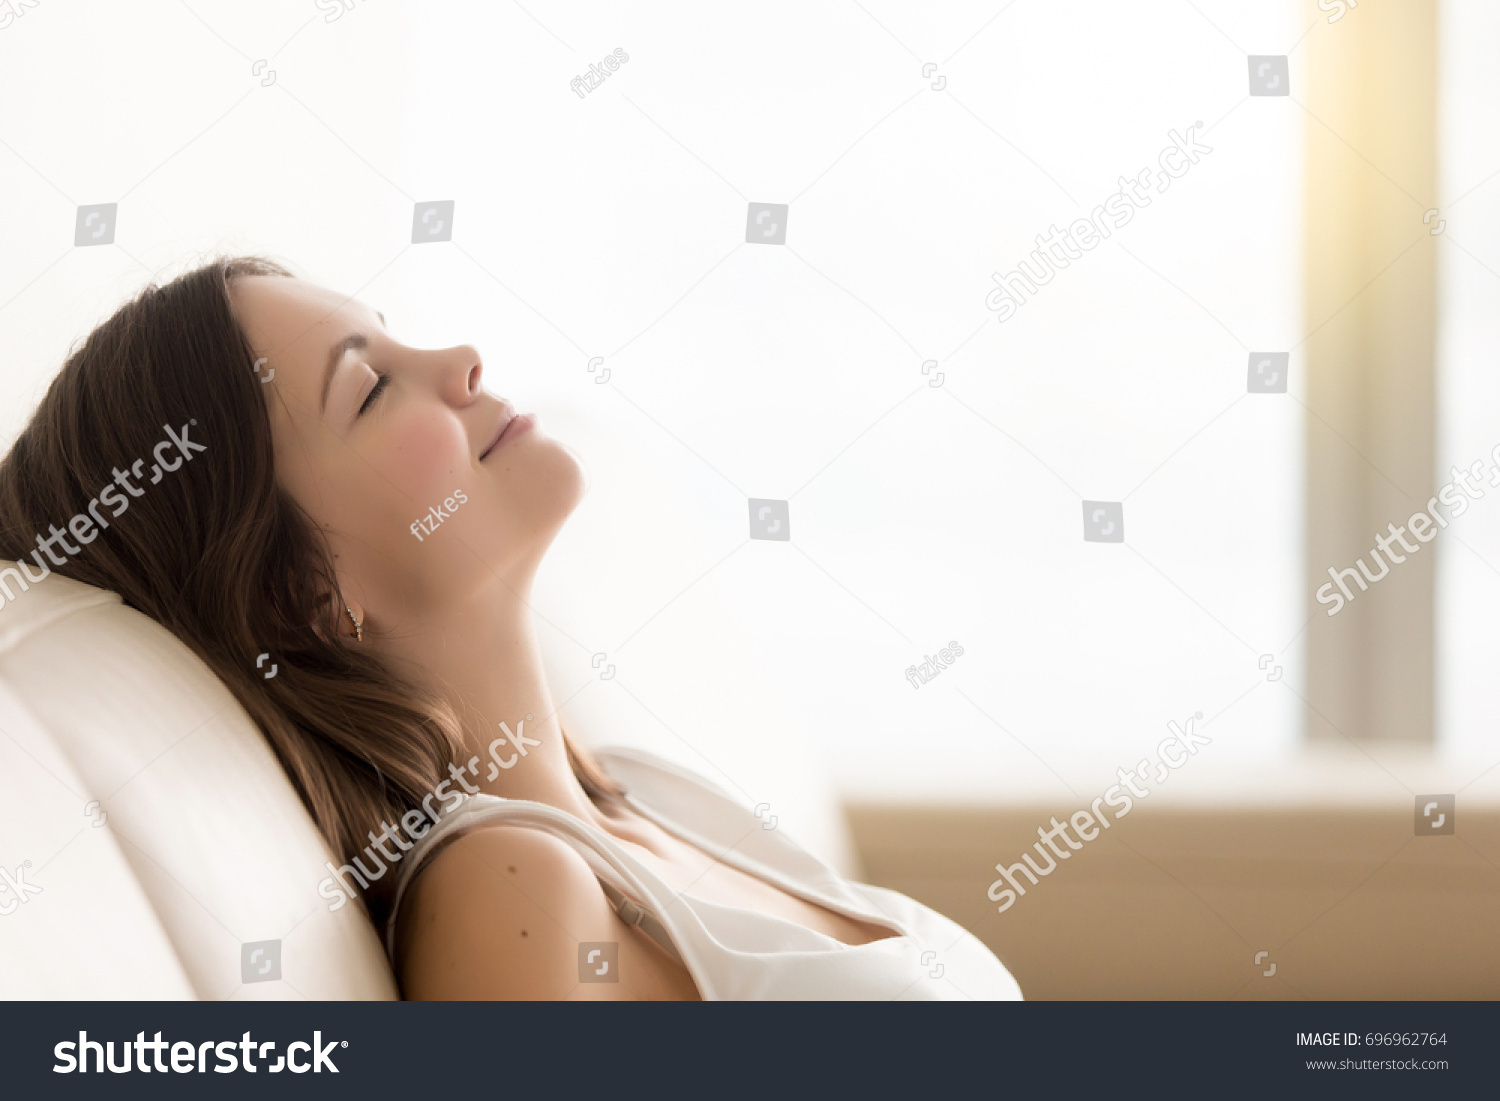 Relaxed young woman enjoying rest on comfortable sofa, calm attractive girl relaxing on couch, breathing fresh air with eyes closed, meditating at home, peace of mind, headshot portrait, copy space #696962764